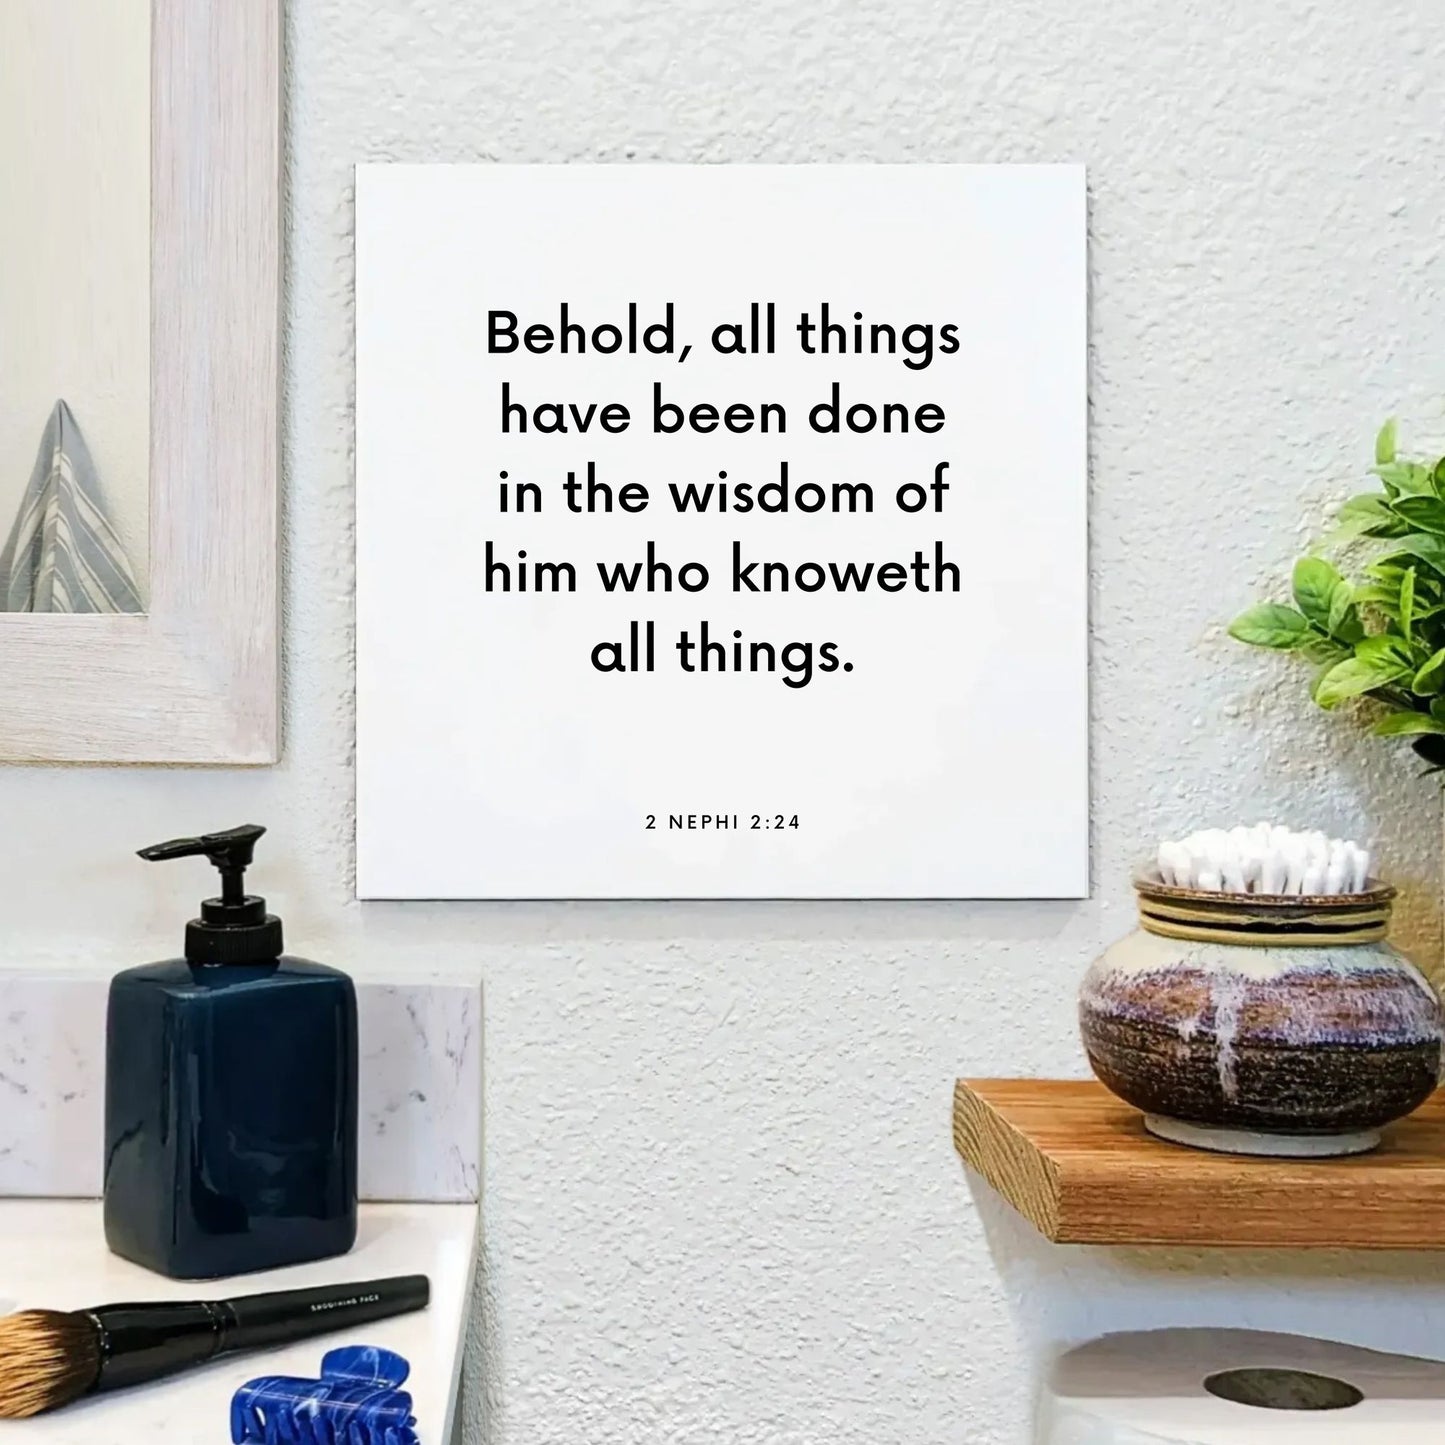 Bathroom mouting of the scripture tile for 2 Nephi 2:24 - "All things have been done in the wisdom of him who knoweth"